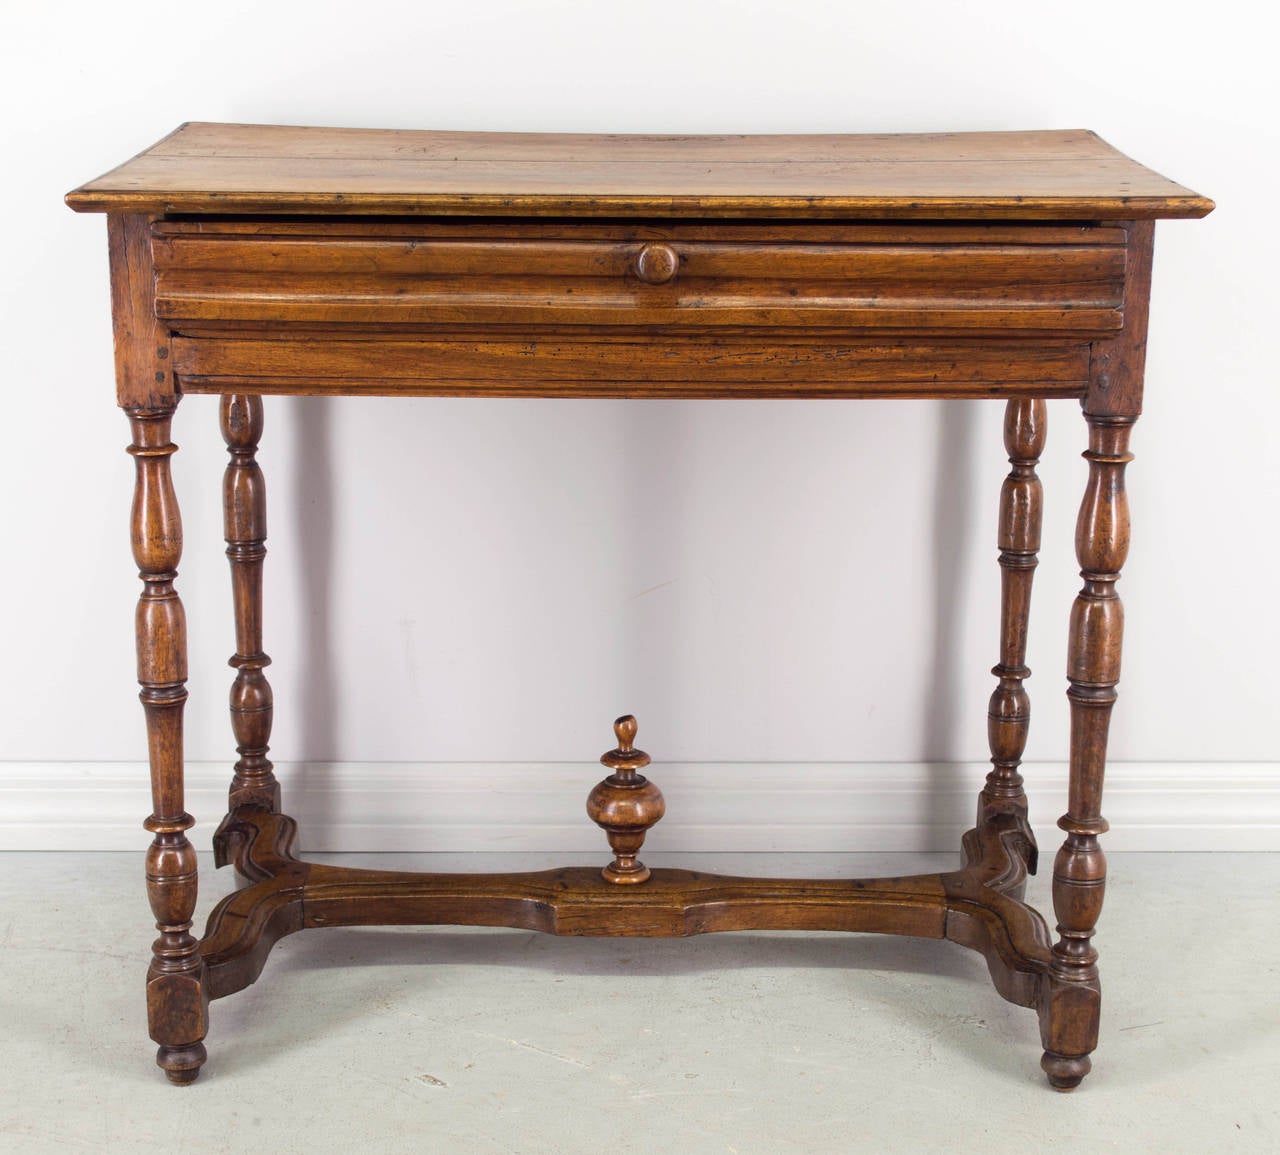 Early 19th century Louis XIII style French side table, made of solid walnut with large dovetailed drawer. Fine turned legs and shaped stretcher with finial. Top is made from two planks. Pegged construction. Waxed patina. Nice proportions for use as